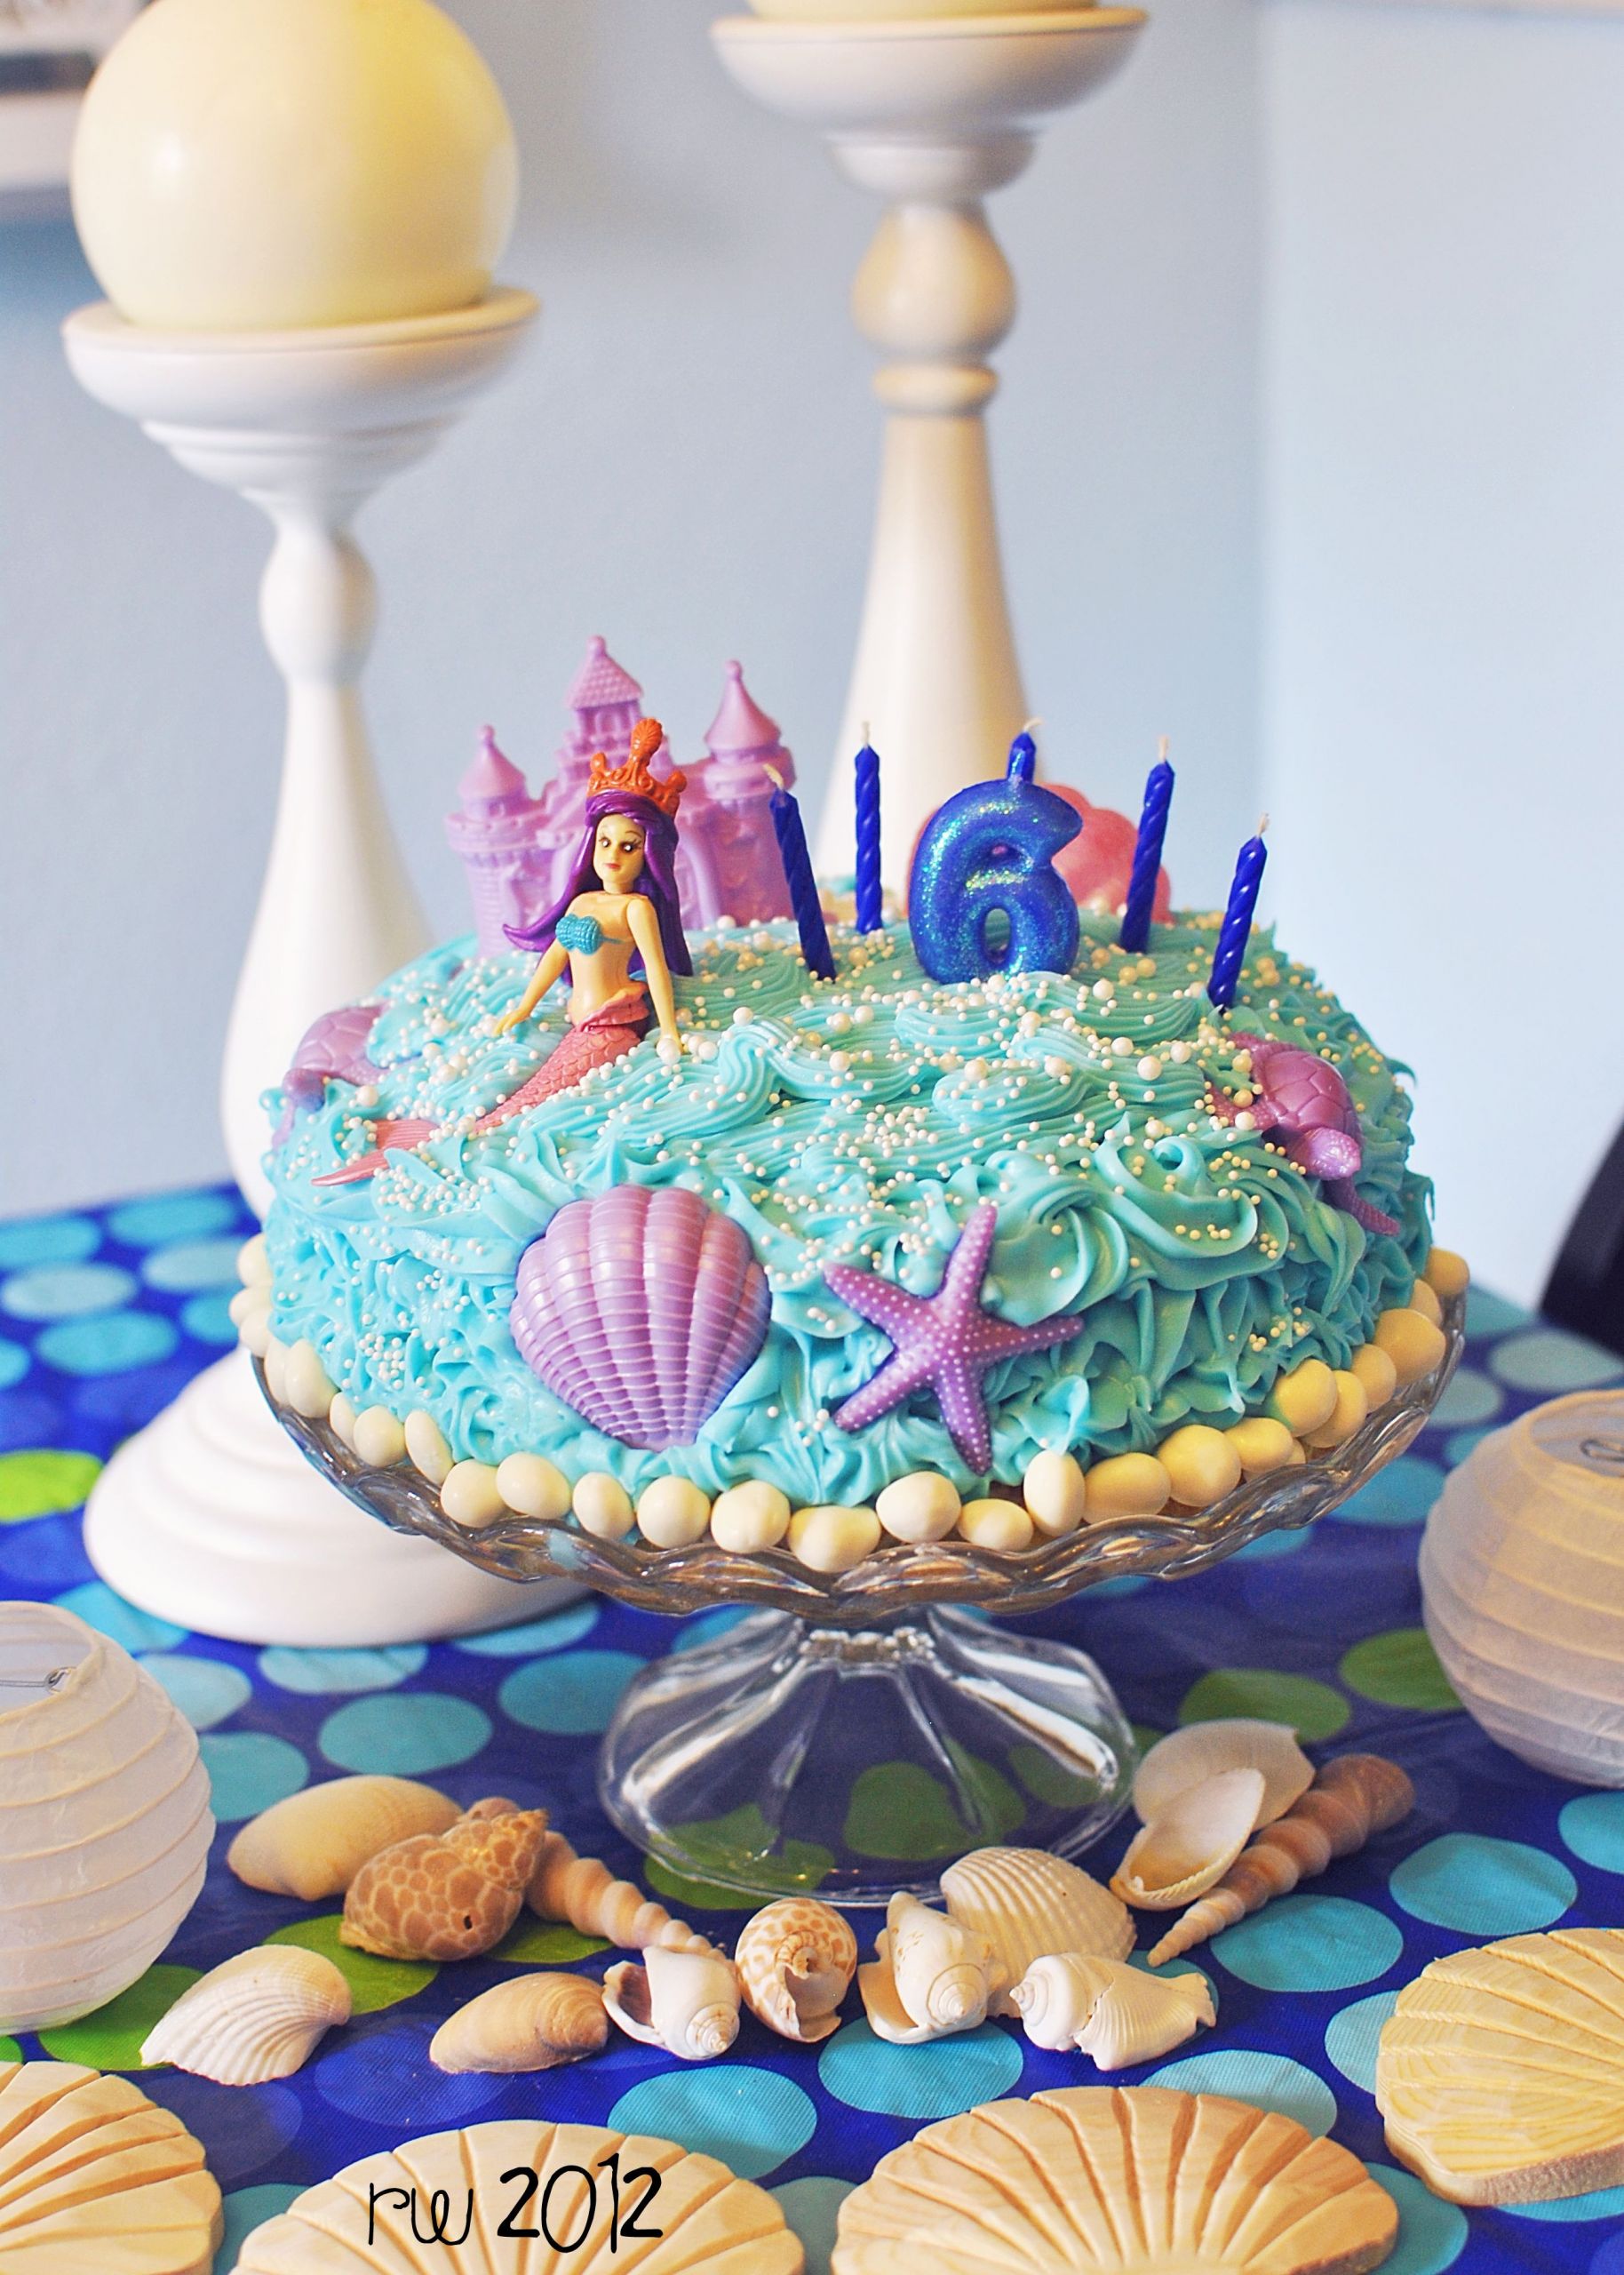 Mermaid Party Ideas 6 Year Old
 mermaid cake easy peasy decorations from the dollar